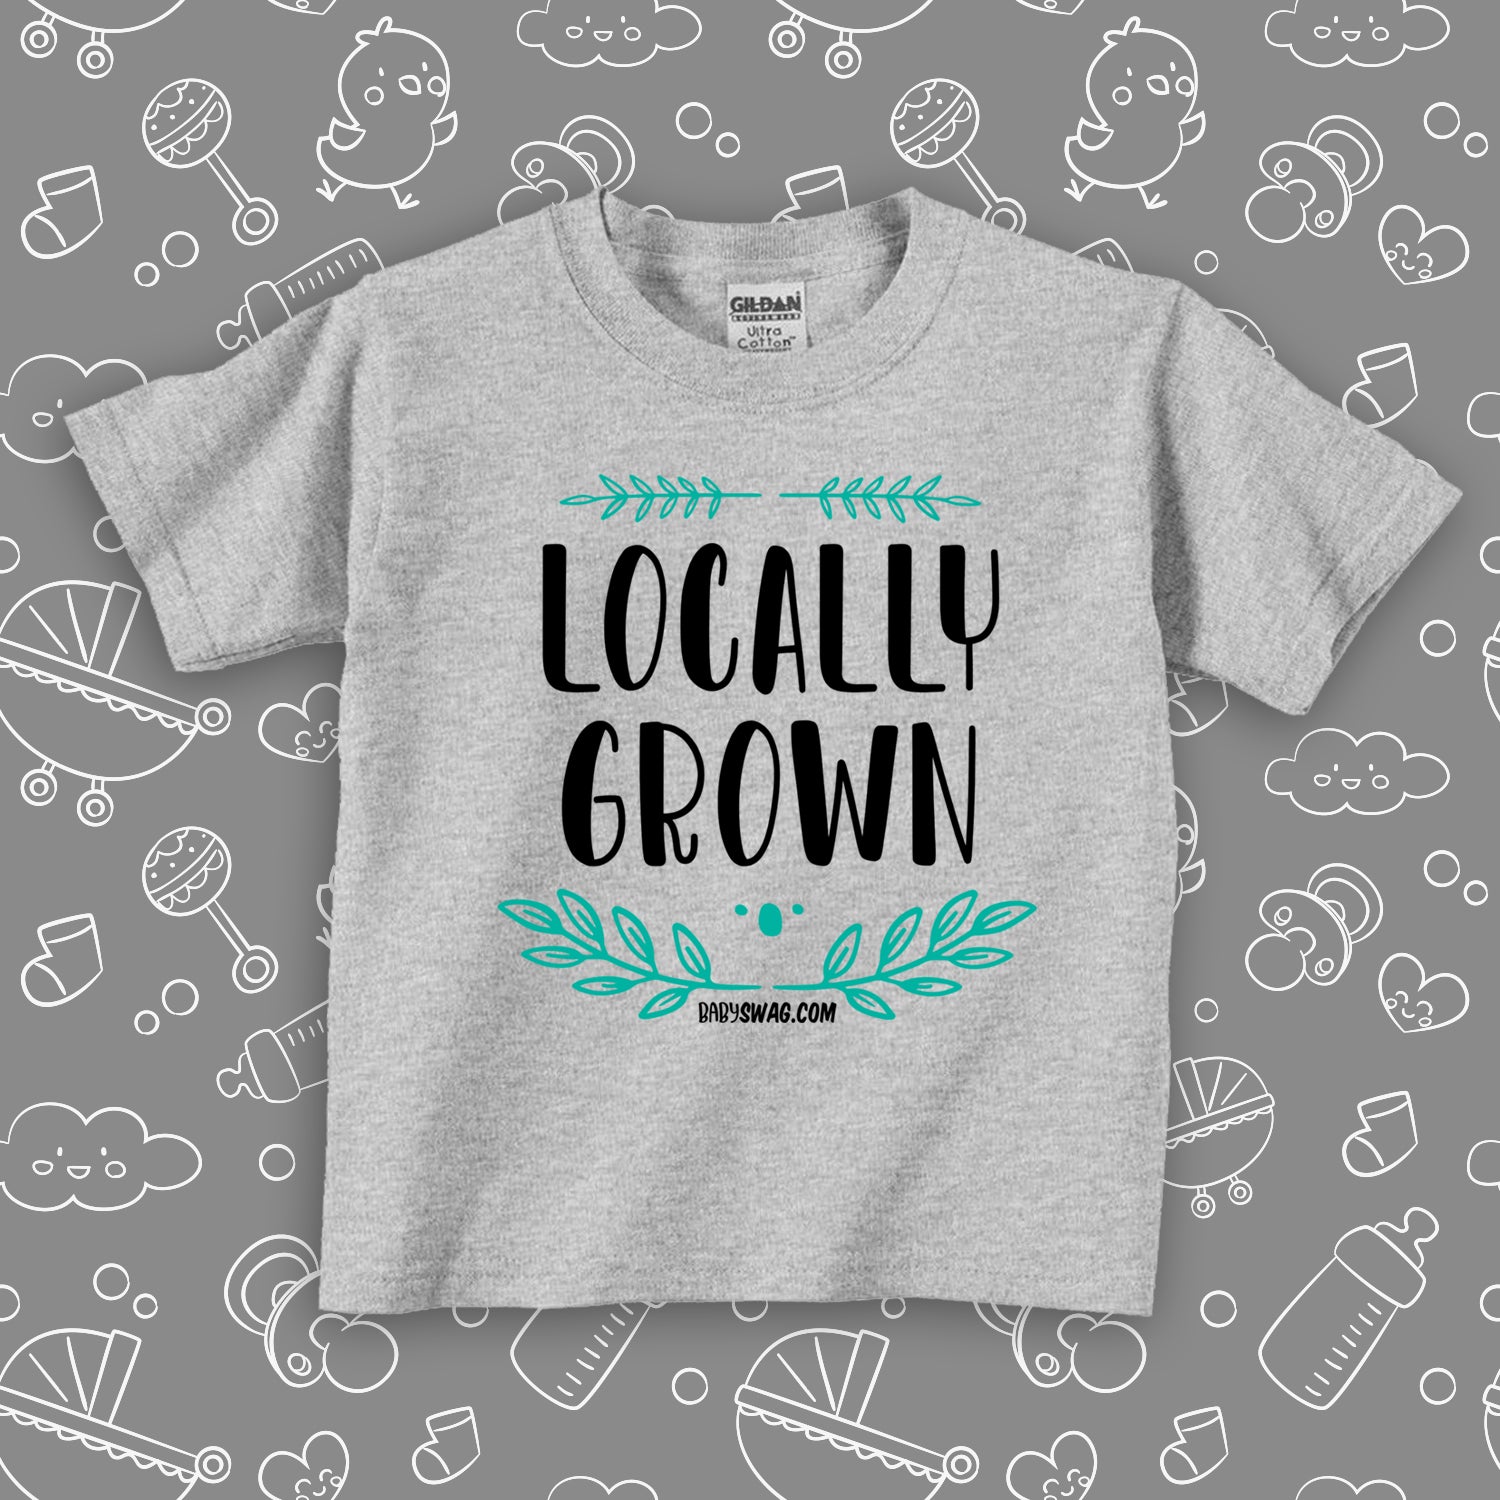 Cute toddler shirts with saying "Locally Grown" in grey. 